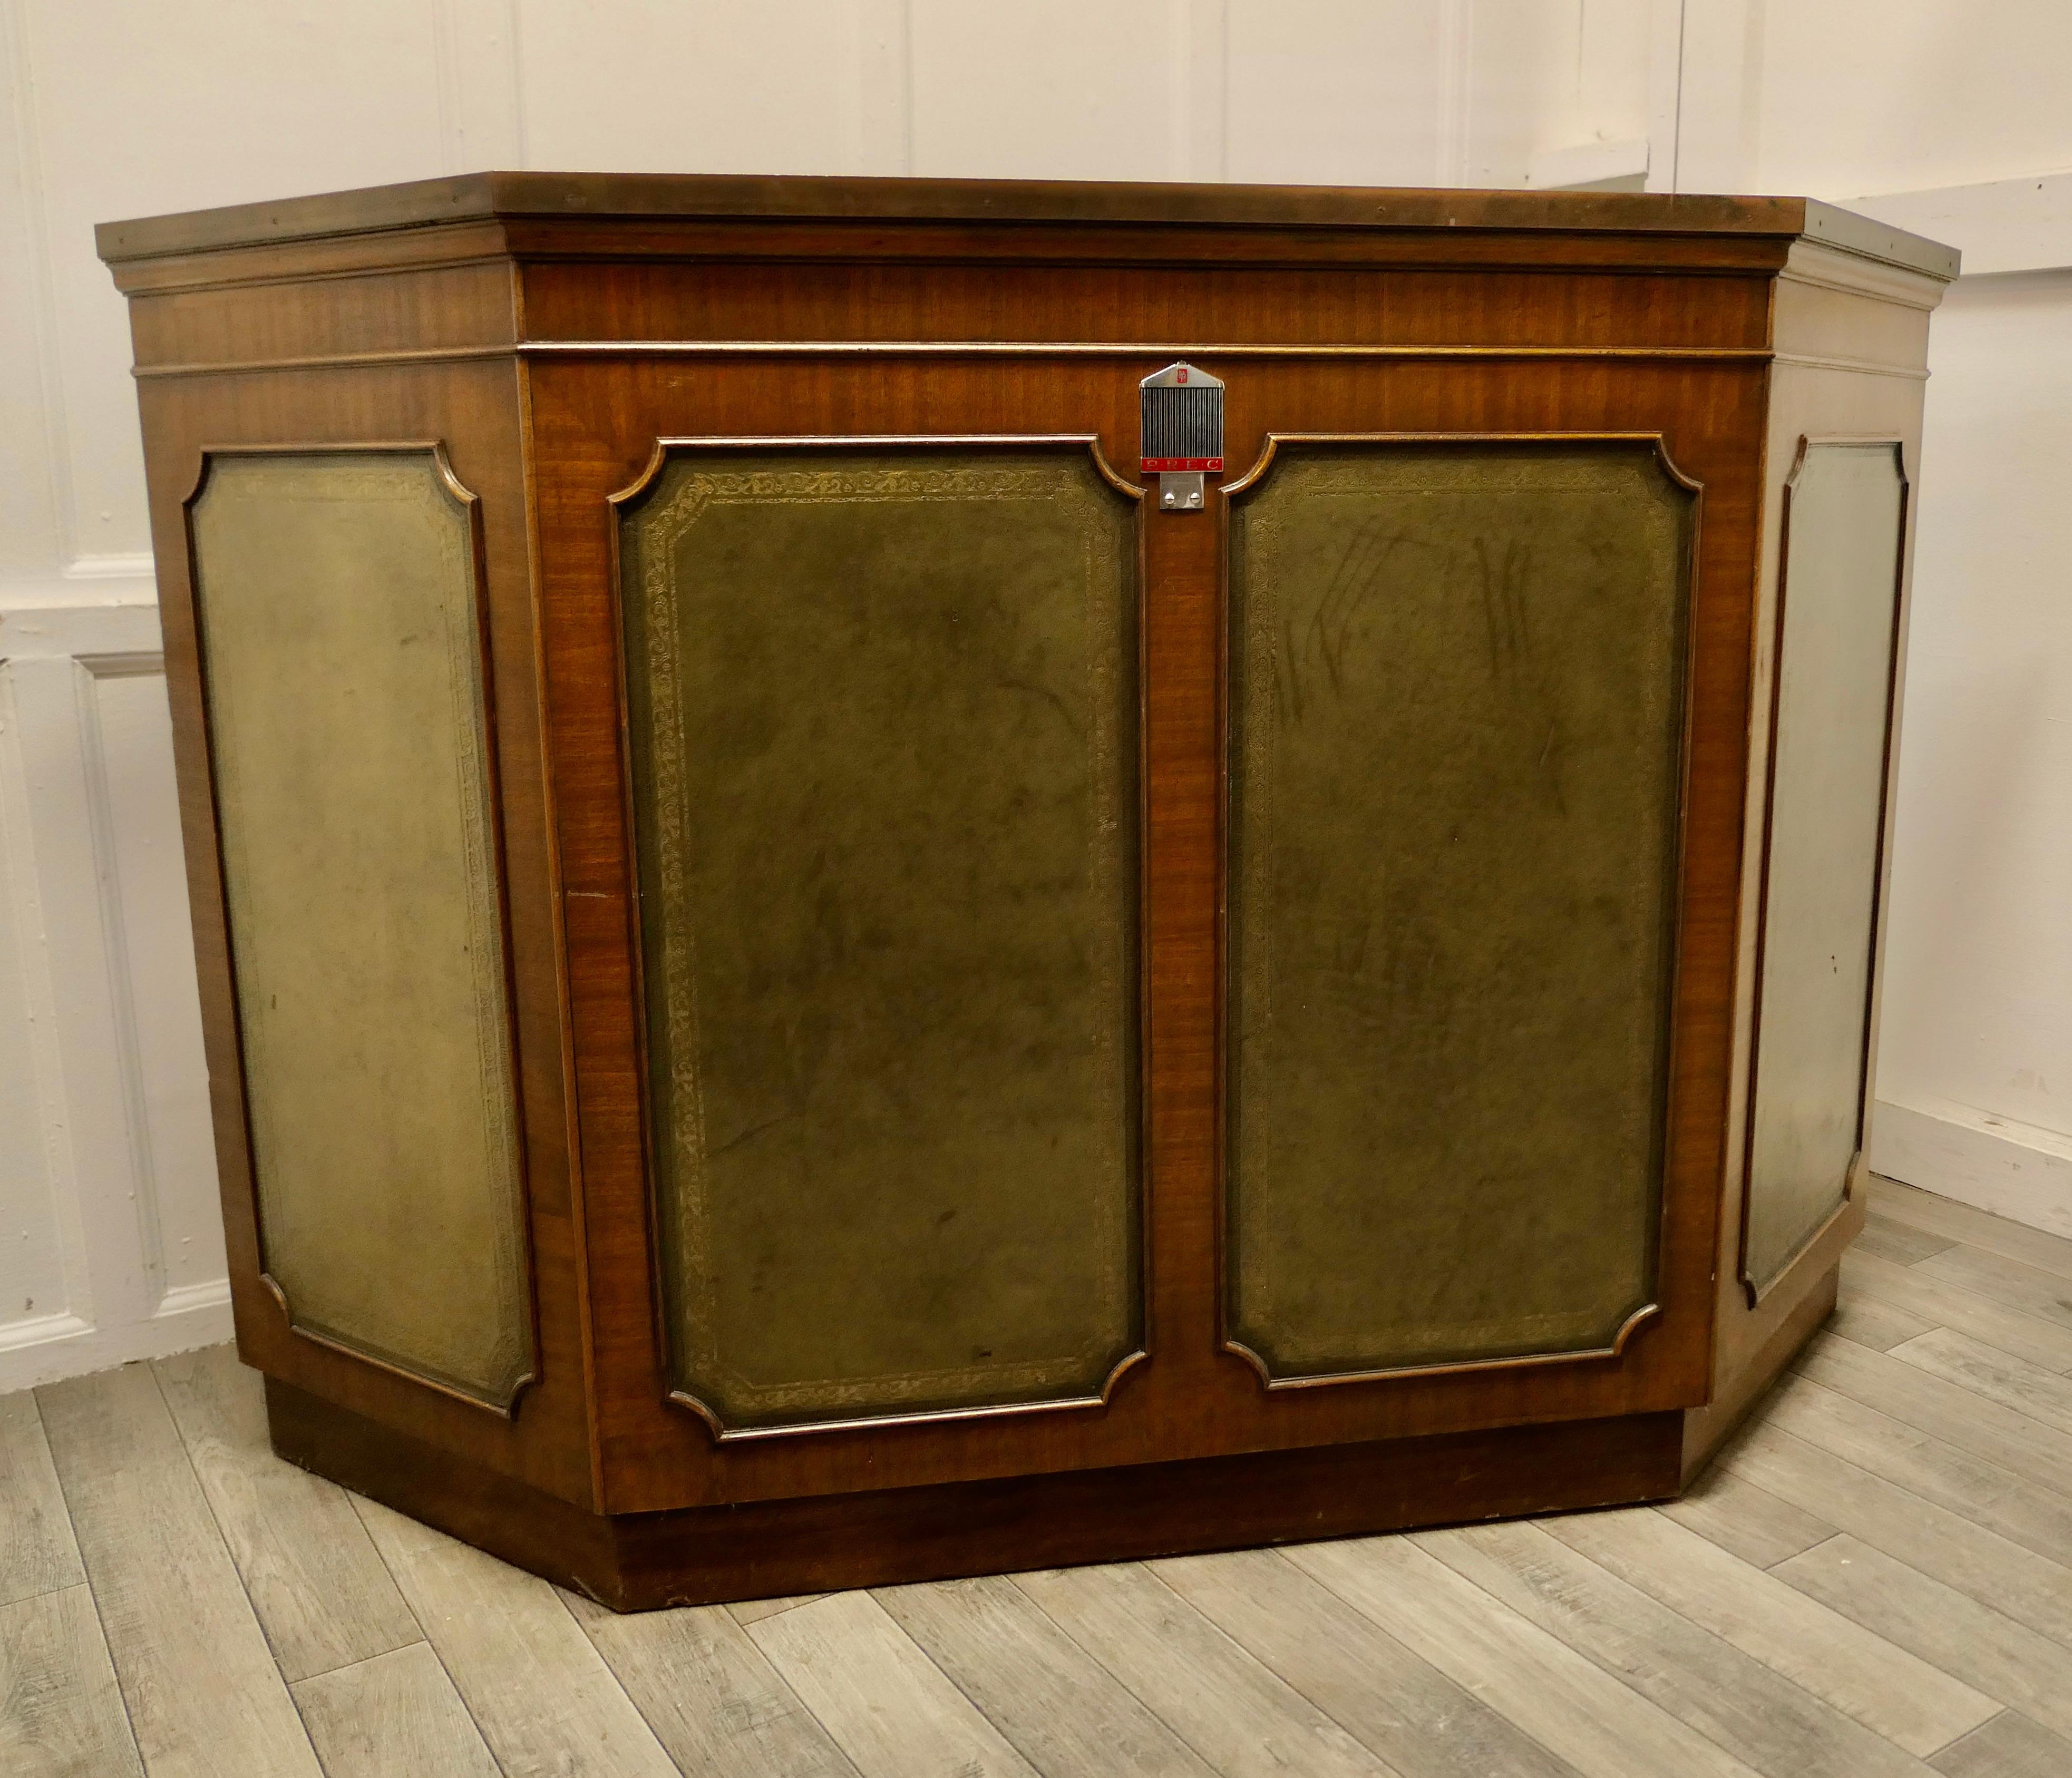 Country House Hostess Greeting Station, Reception Bar

A superb and stylish piece, the greeter comes from a Country House Hotel, it has fully tooled green leather panels around the 3 sided front, the top which takes up the shape of the surround is